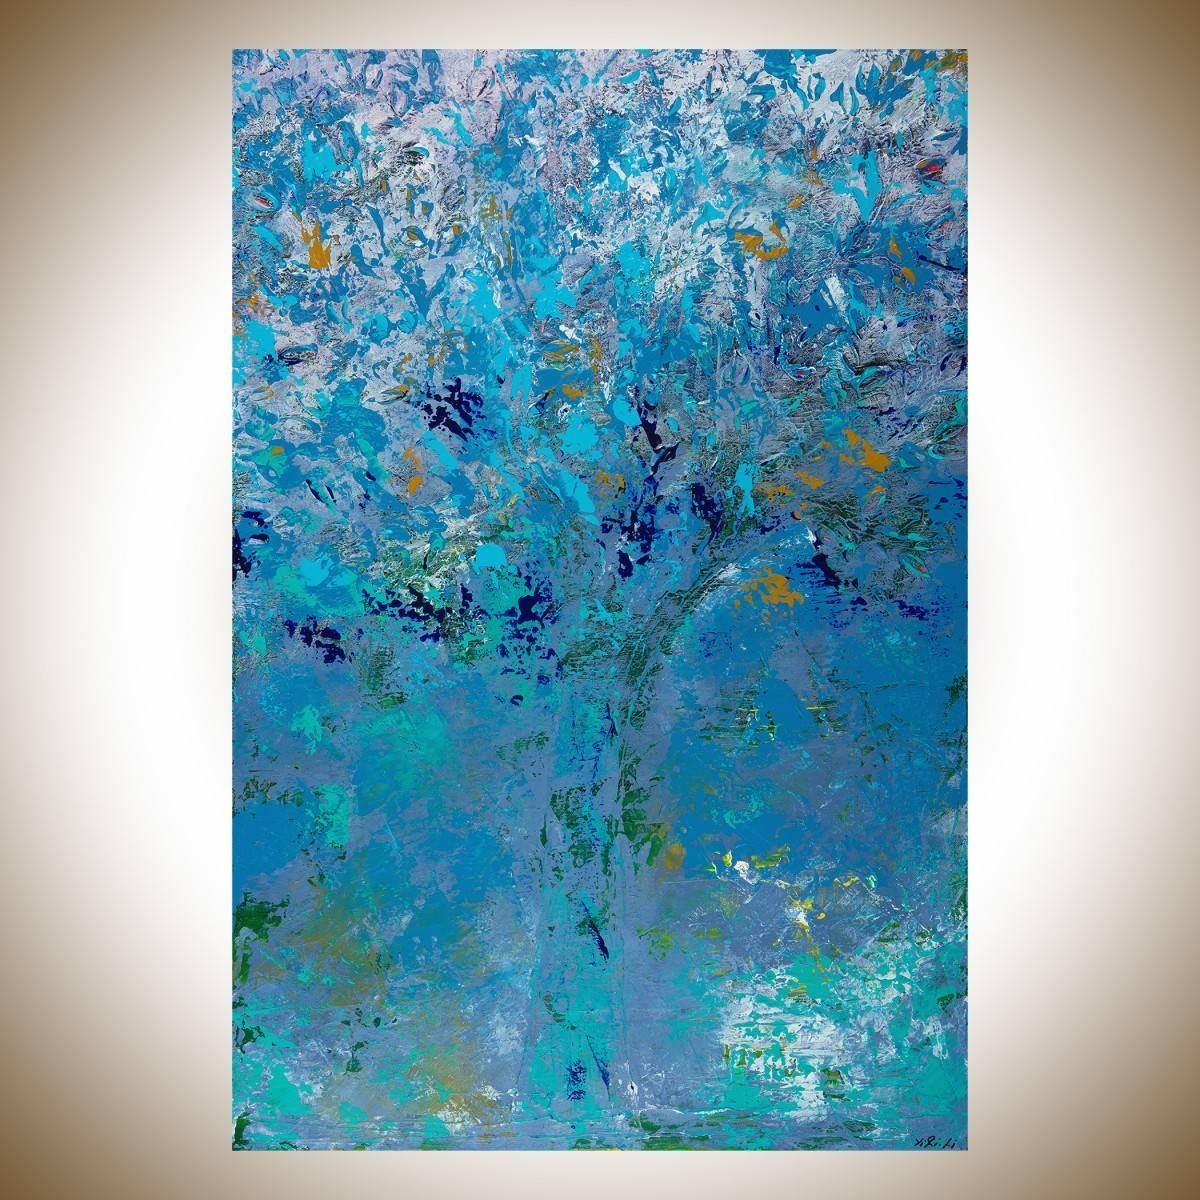 First Snowfallqiqigallery 36"x24" Original Modern Contemporary Throughout Recent Turquoise And Black Wall Art (Gallery 4 of 20)